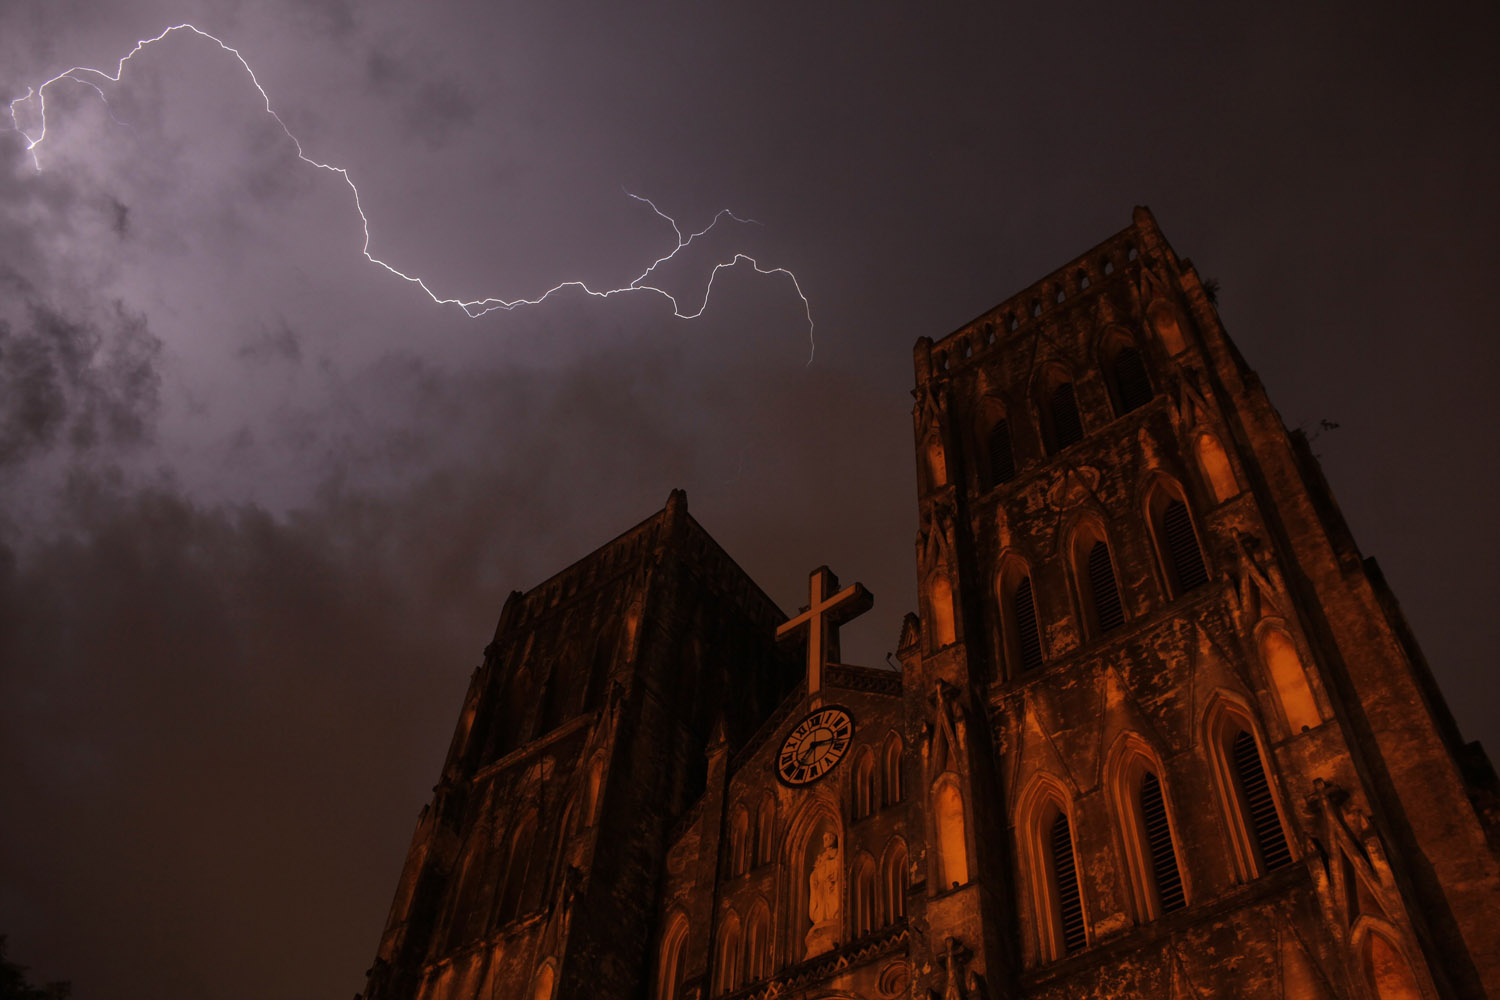 July 14, 2012. Lighting strikes over Saint Joseph cathedral during a storm in Hanoi.